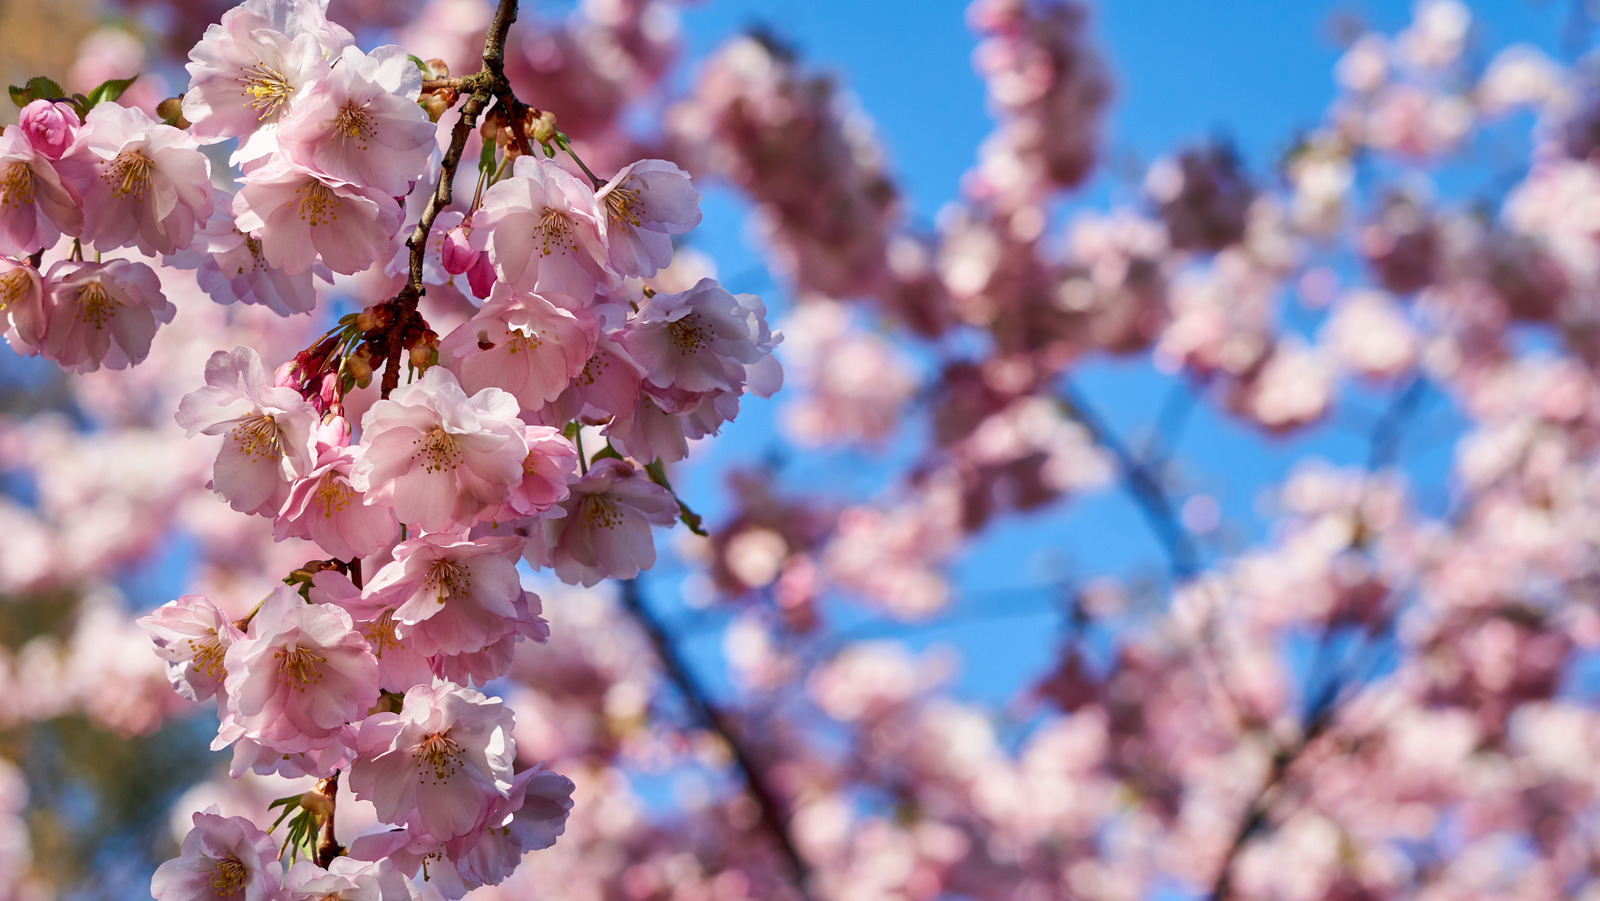 8 Cherry Blossom Varieties to See in Tokyo this Spring